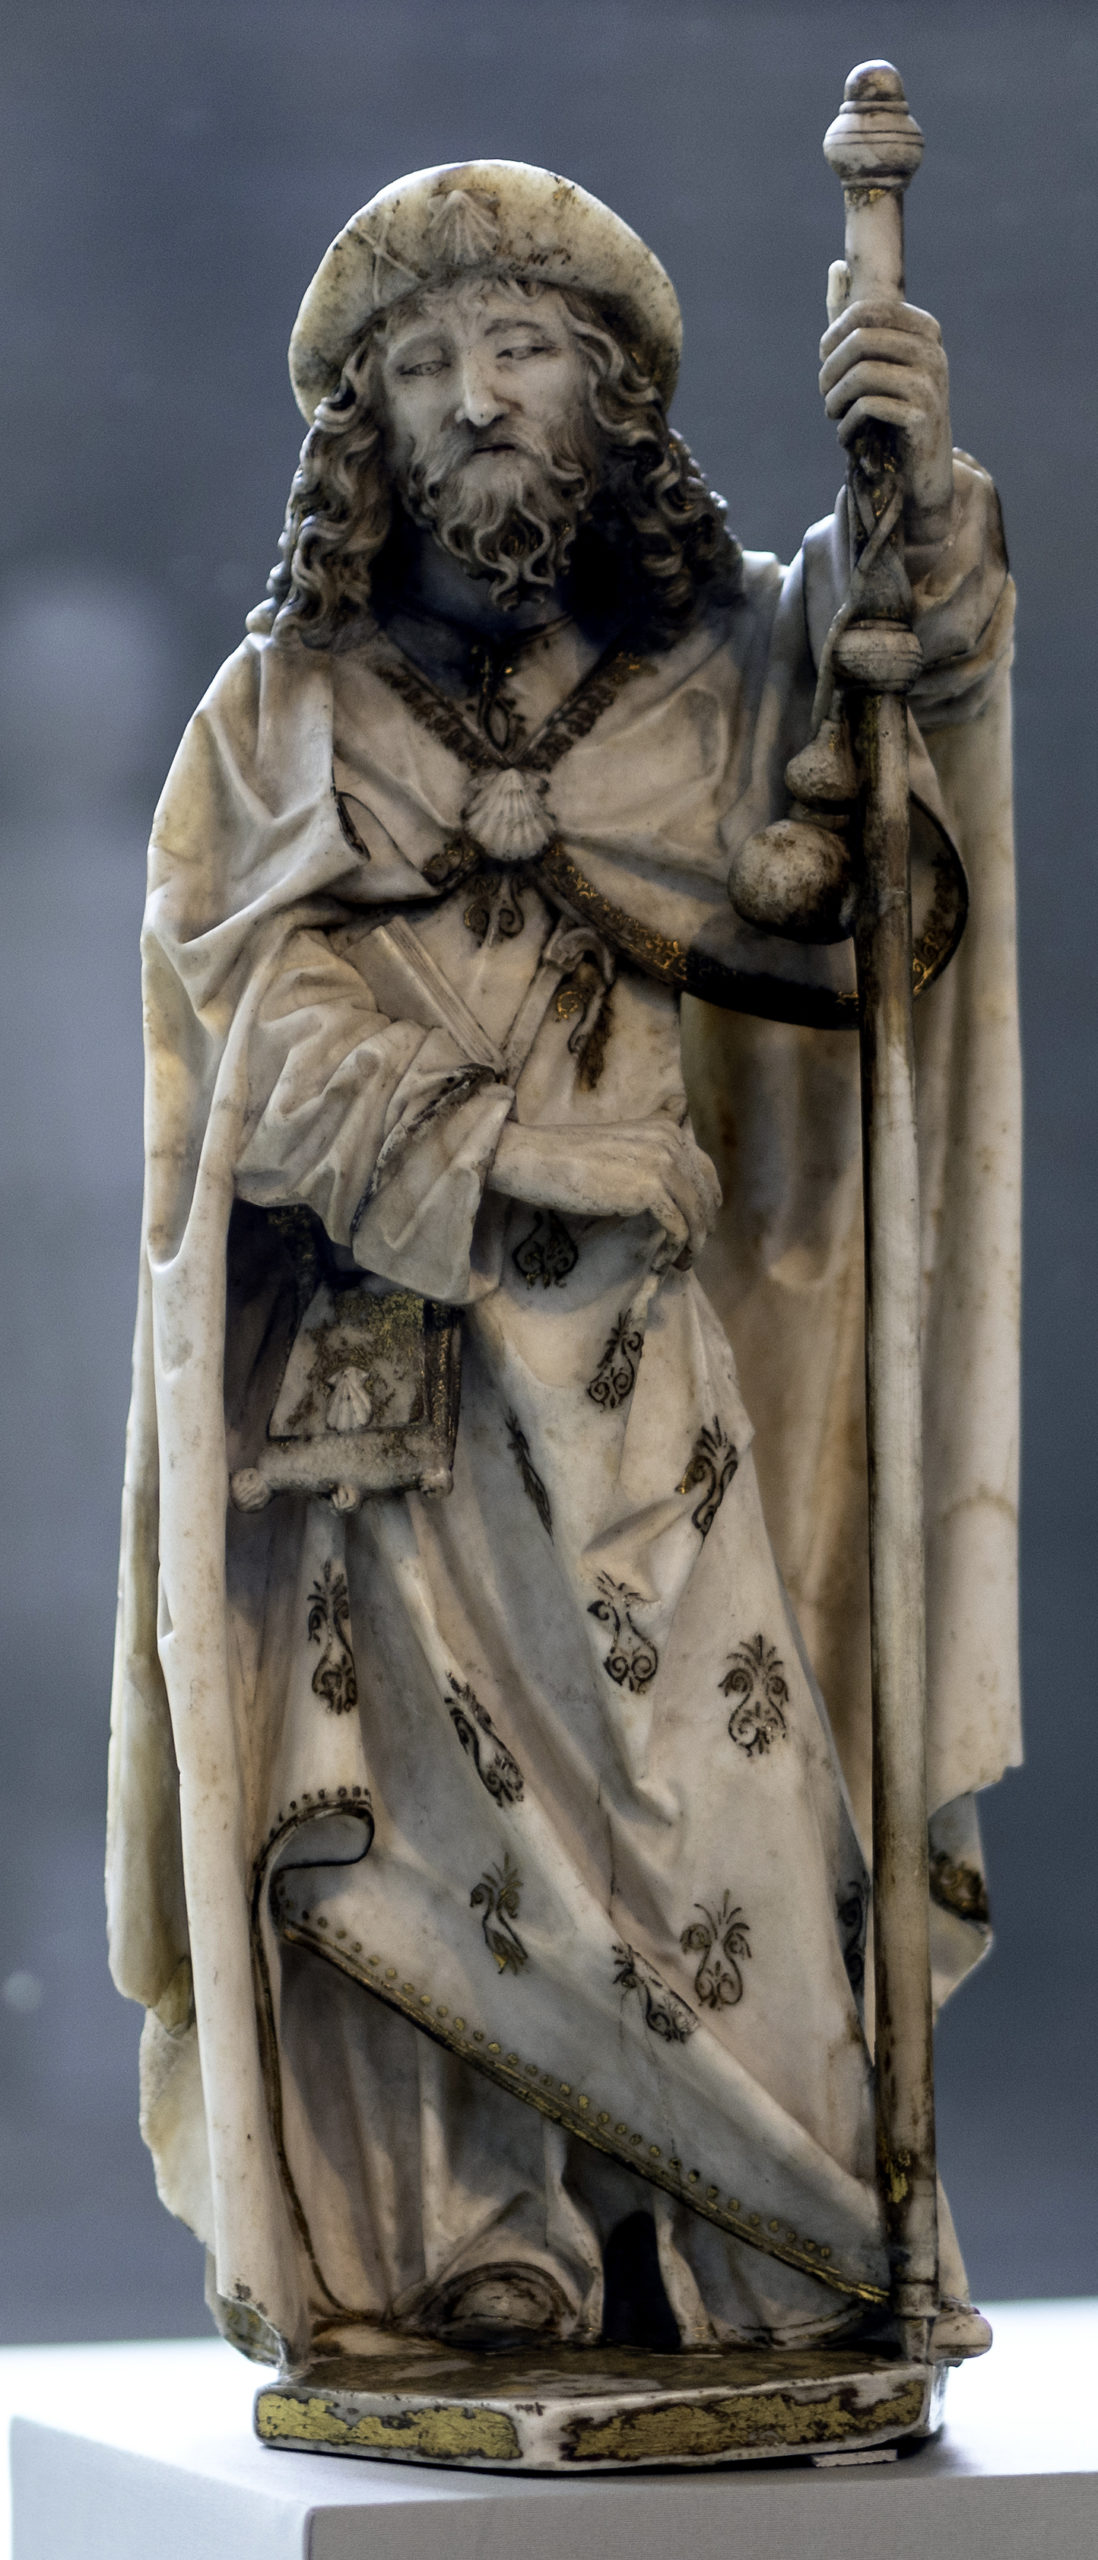 Gil de Siloe, St. James the Greater, from the Tomb of Juan II of Castile and Isabel of Portugal, 1489-93, alabaster (The Cloisters, The Metropolitan Museum of Art)